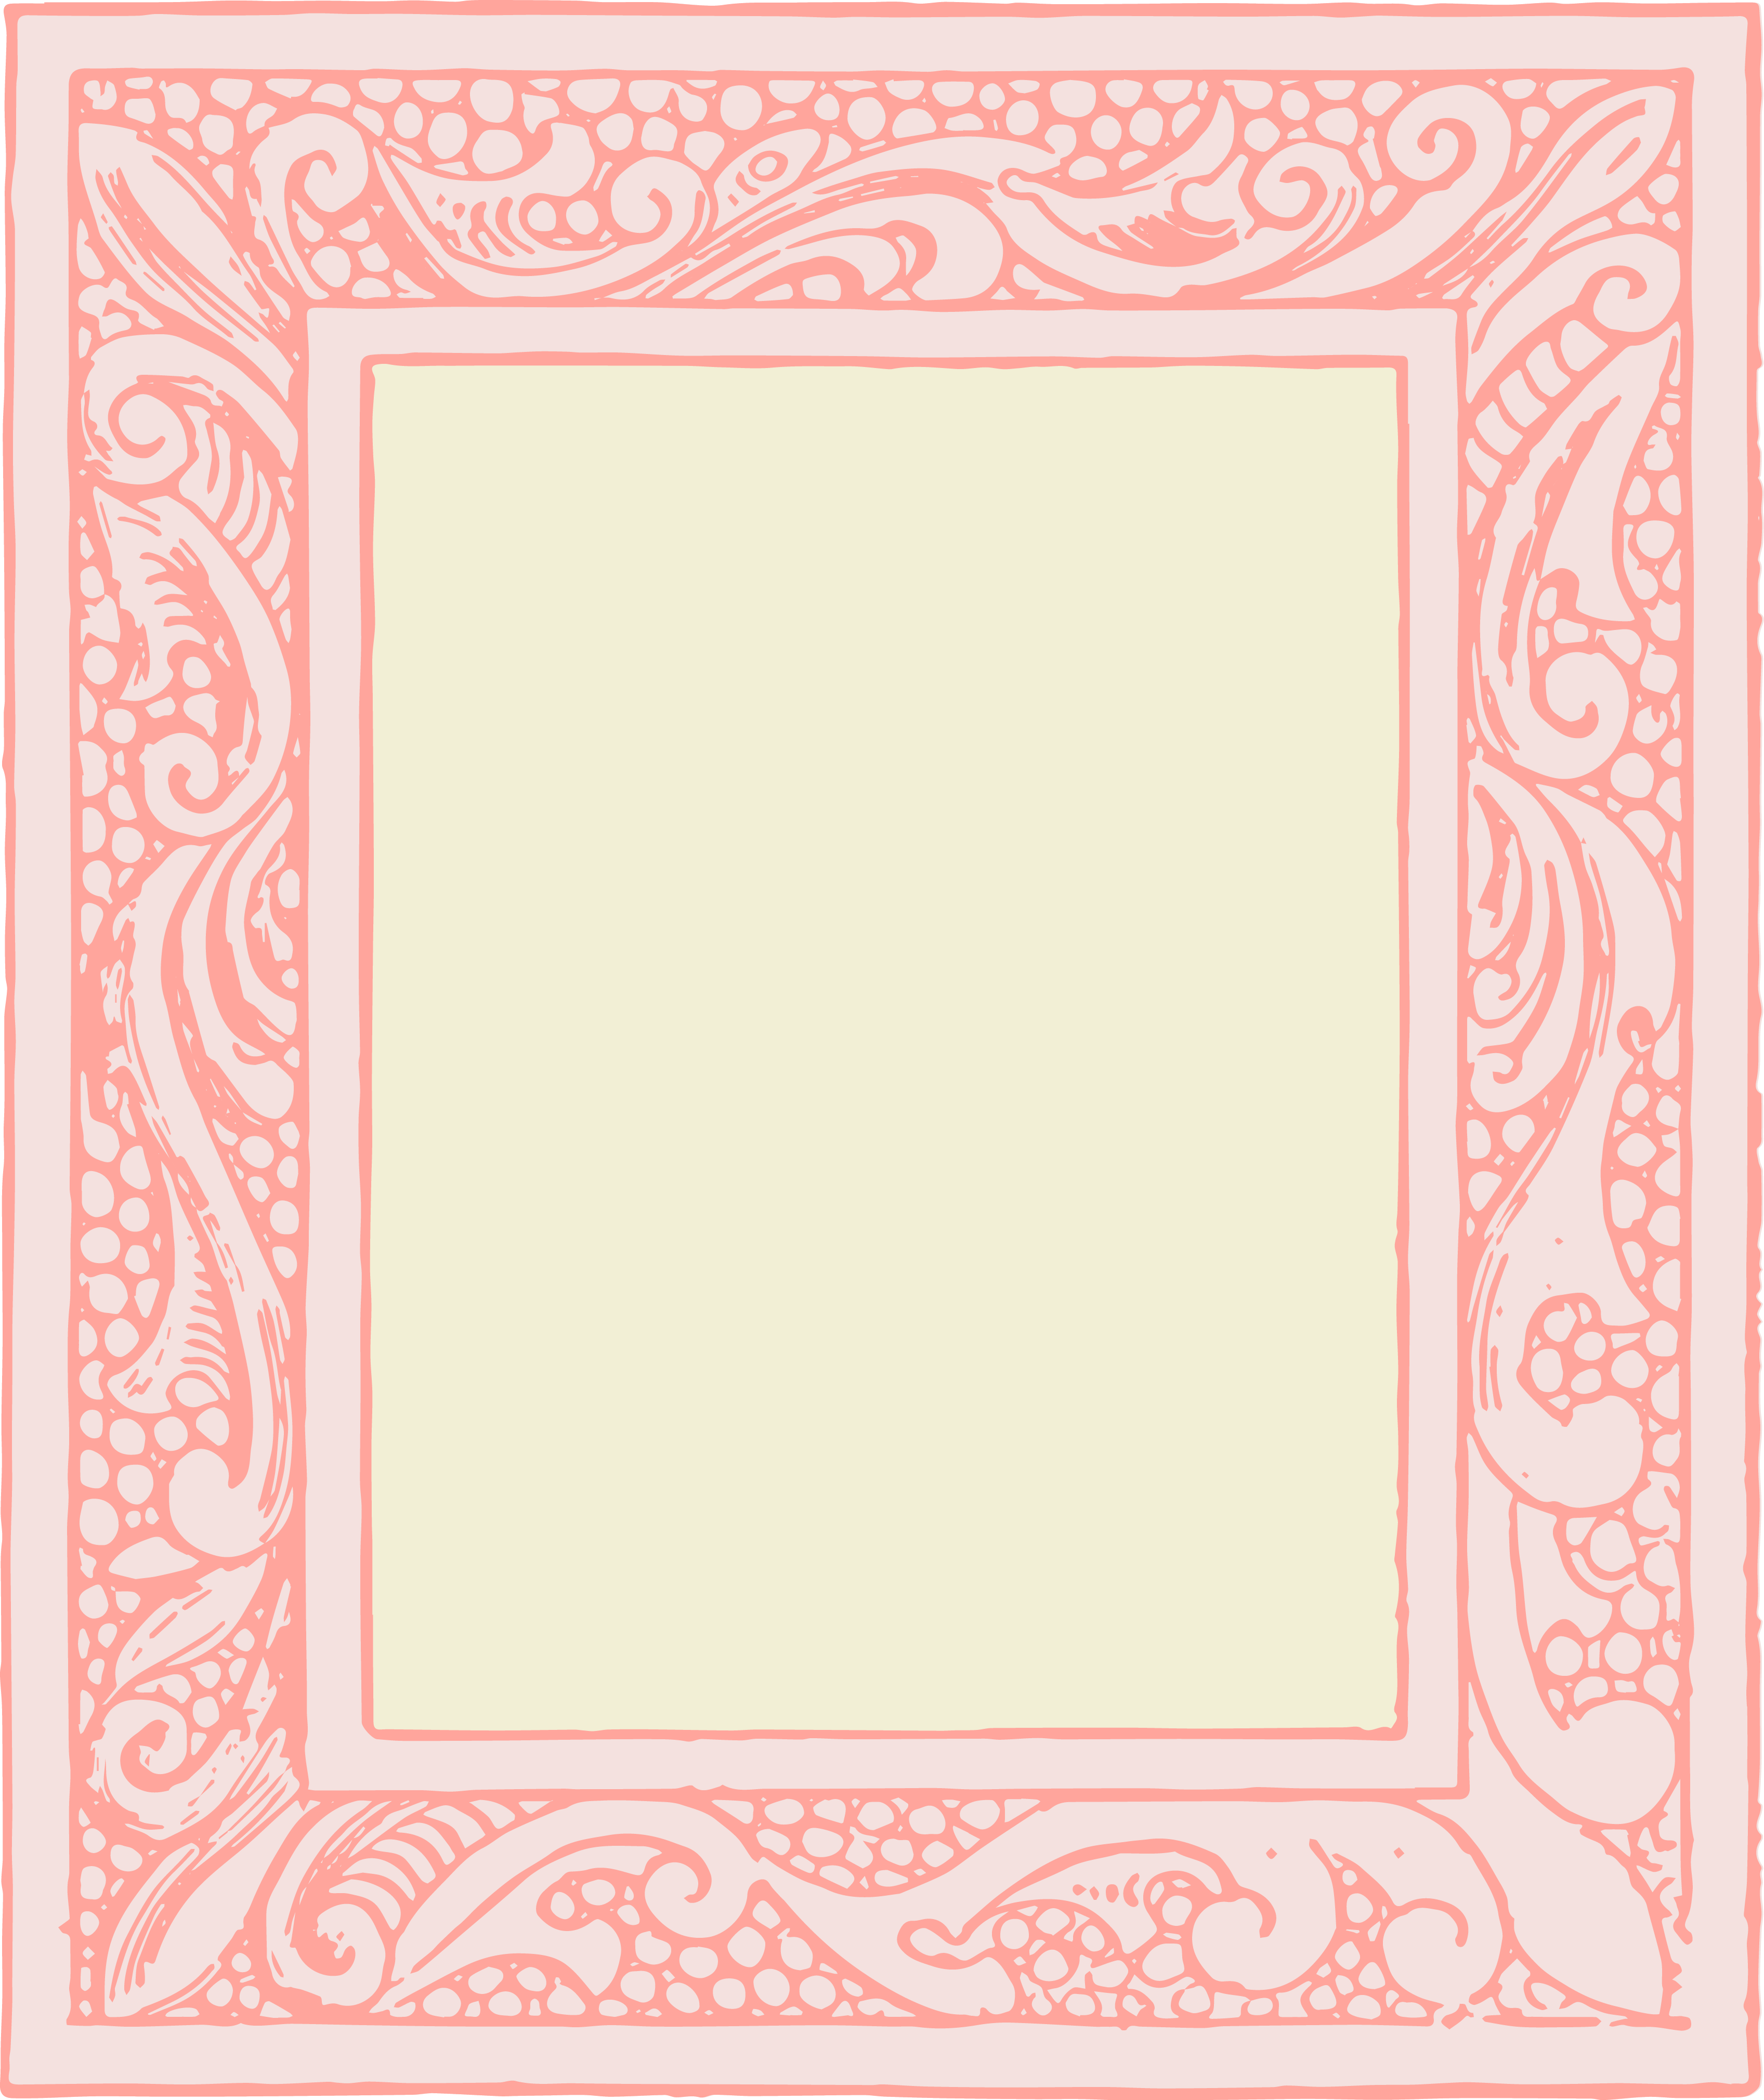 Free Vector Clipart   Vintage Frames   Oh So Nifty Vintage Graphics